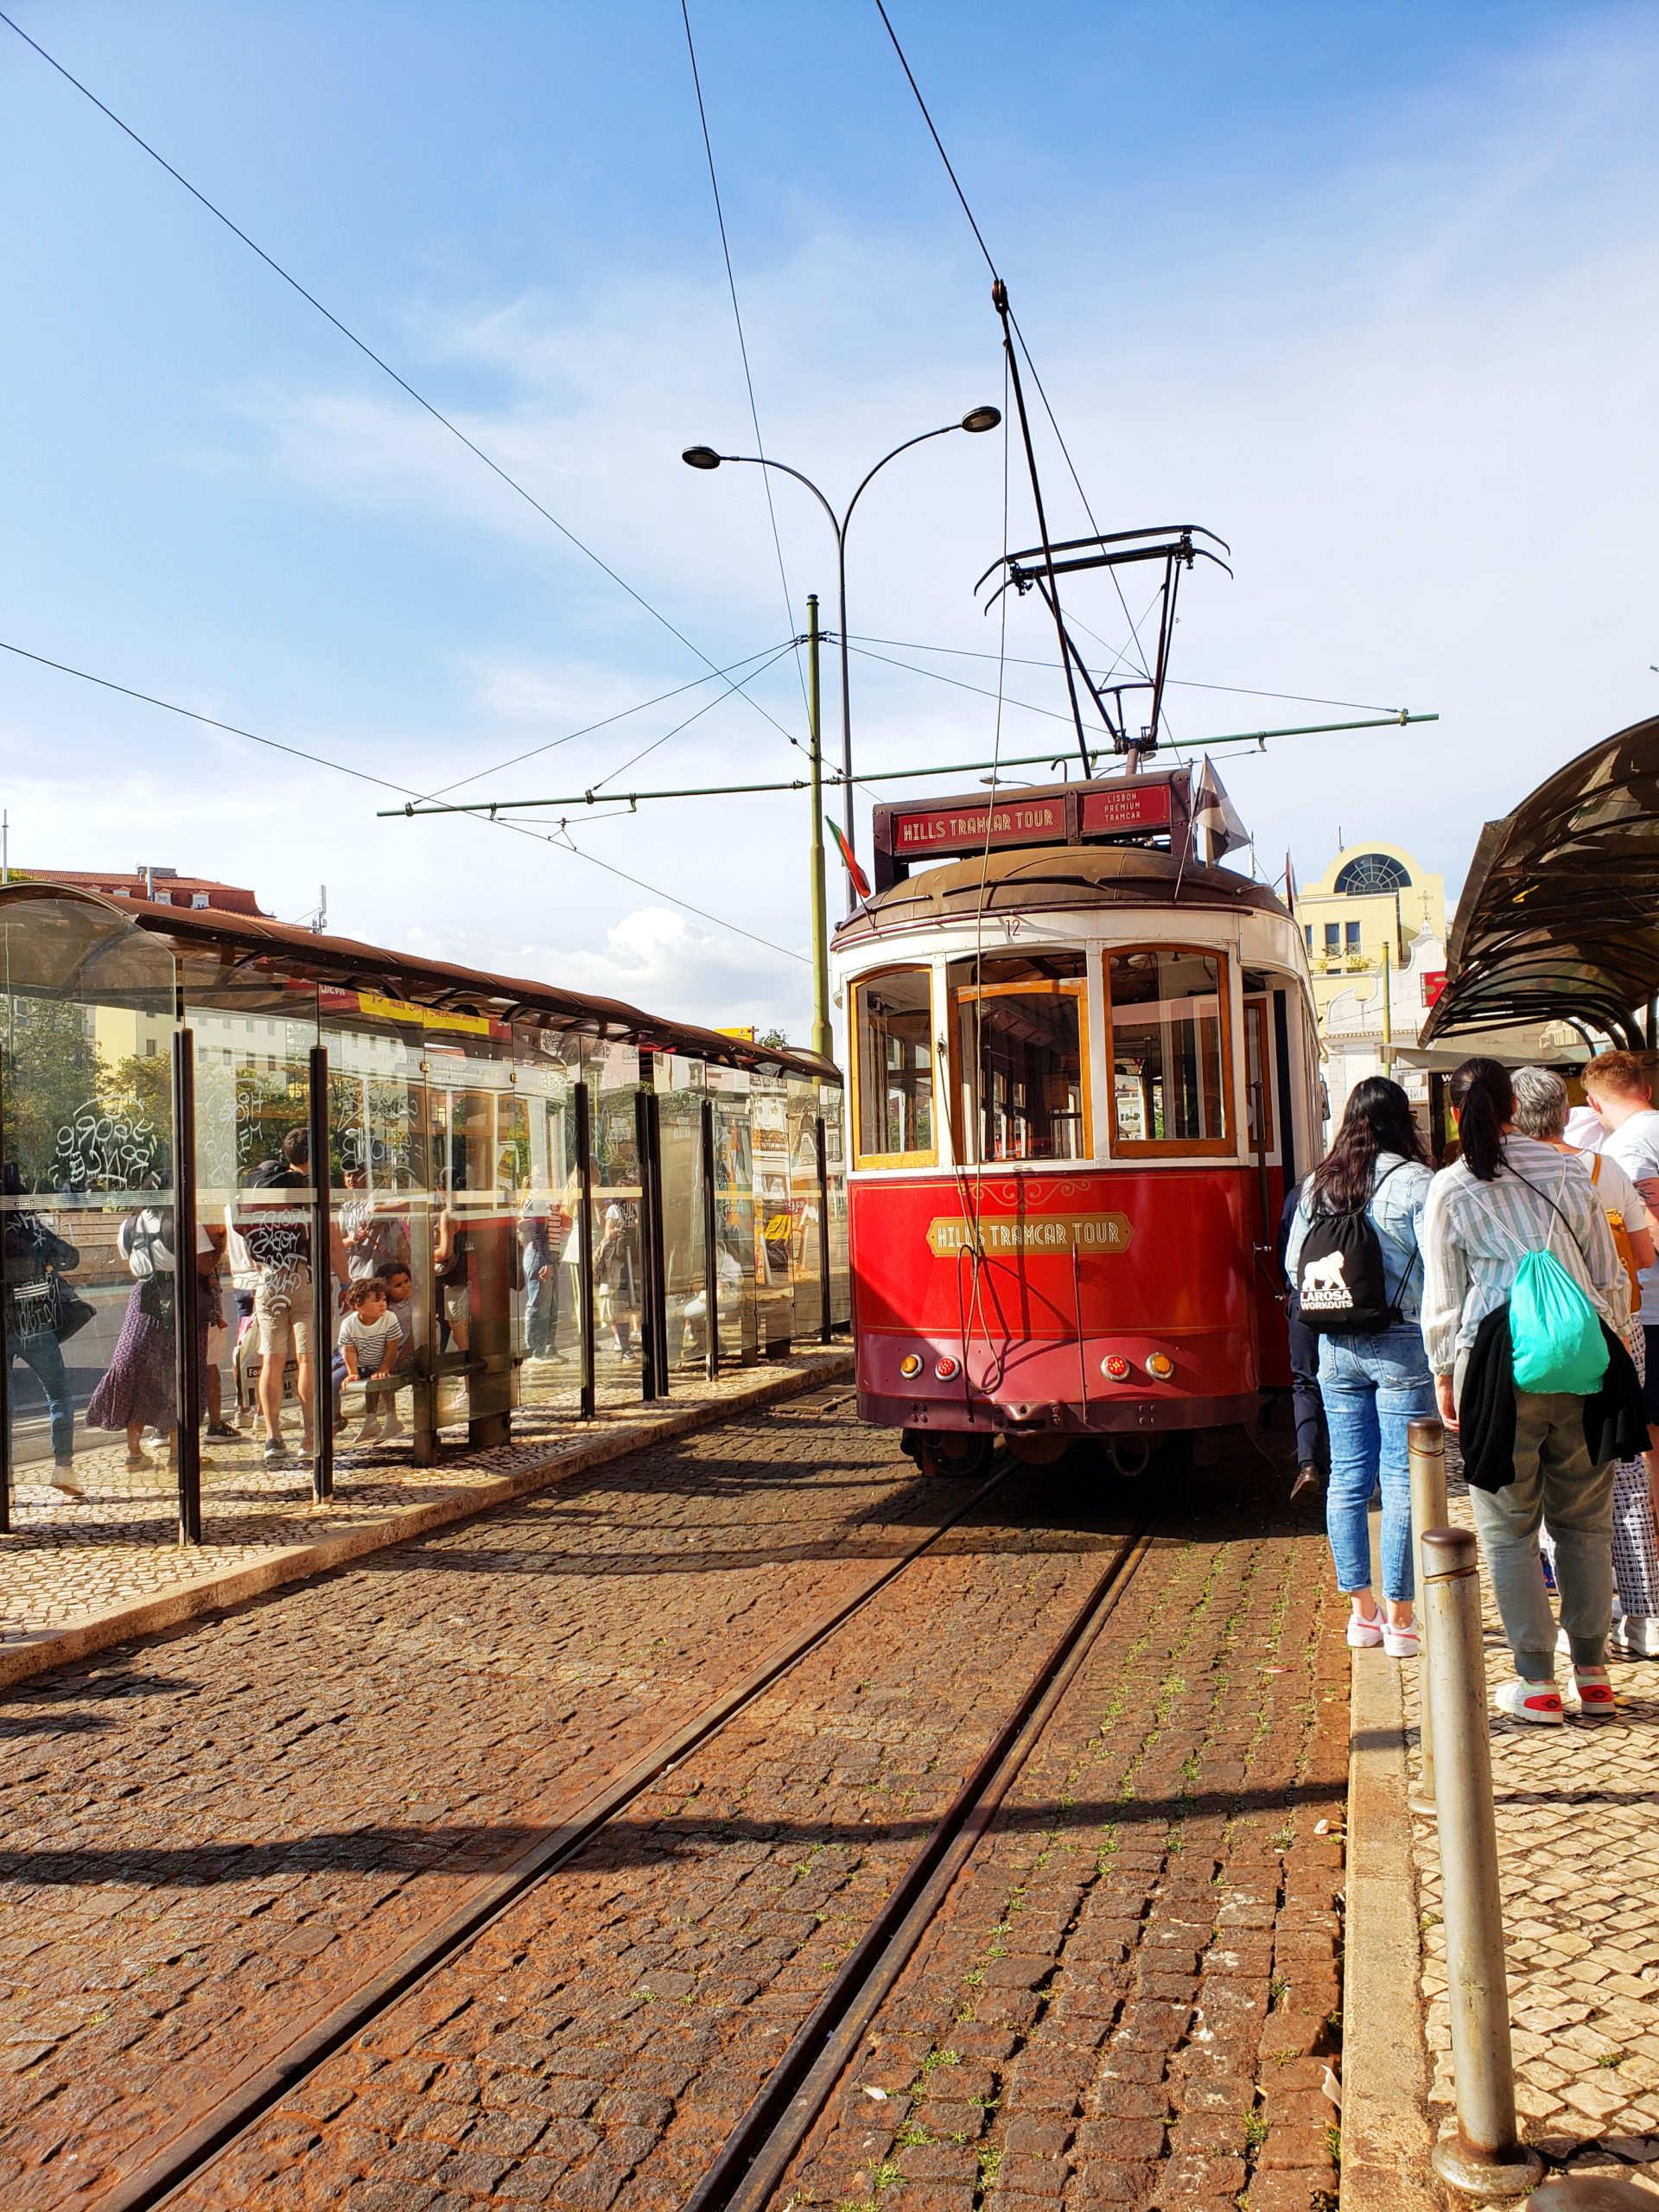 A Complete City Guide To Lisbon